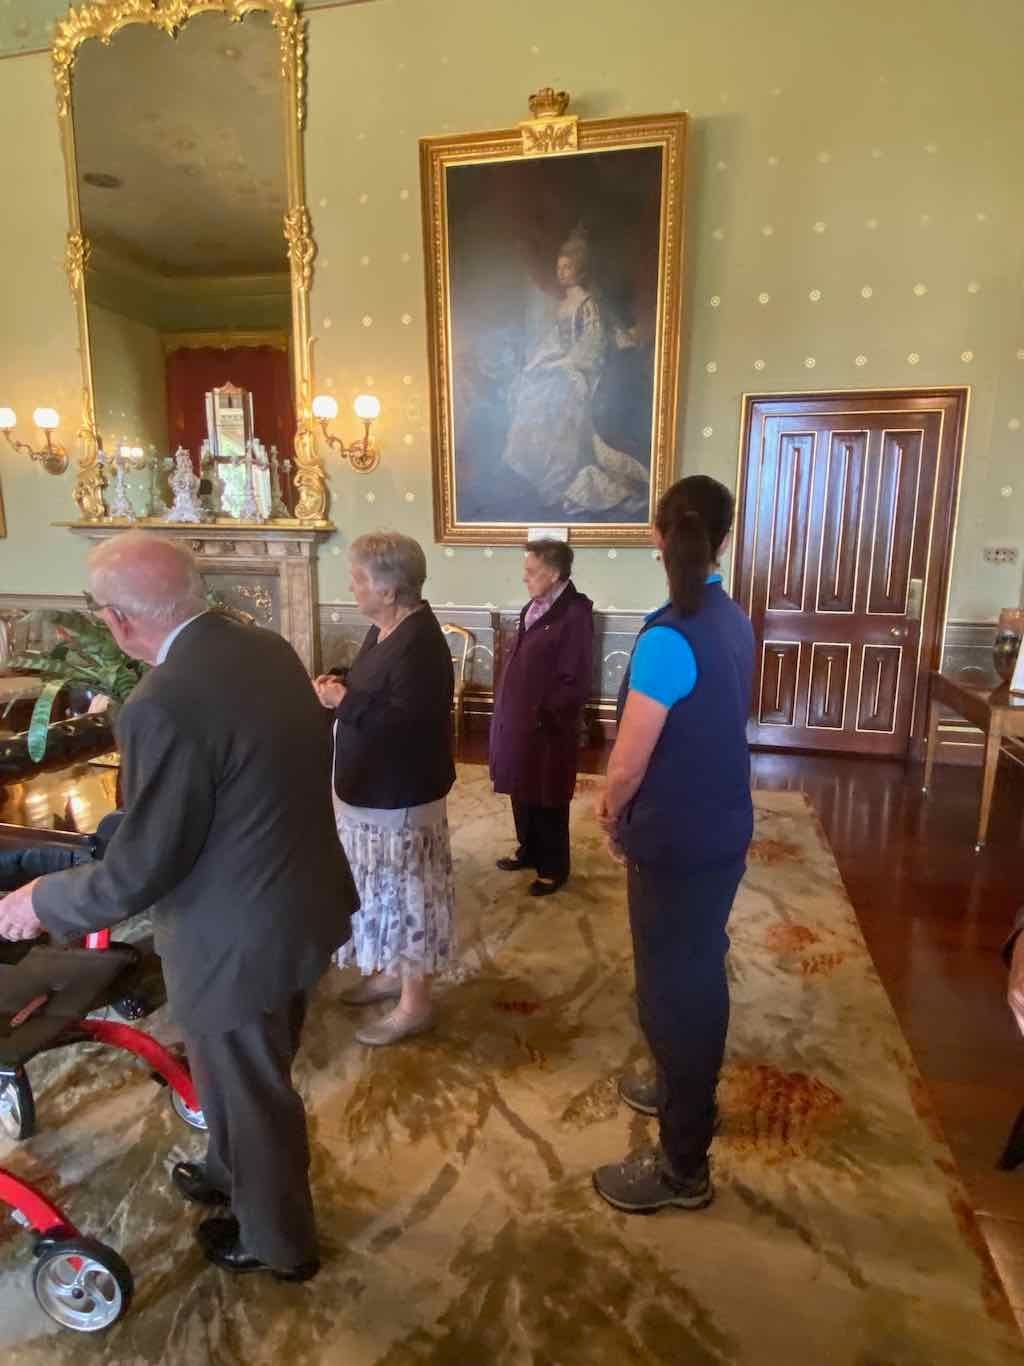 Government House + High Tea at Parliament House - December 2022 Public Day Tour Image -639c13beeb42b